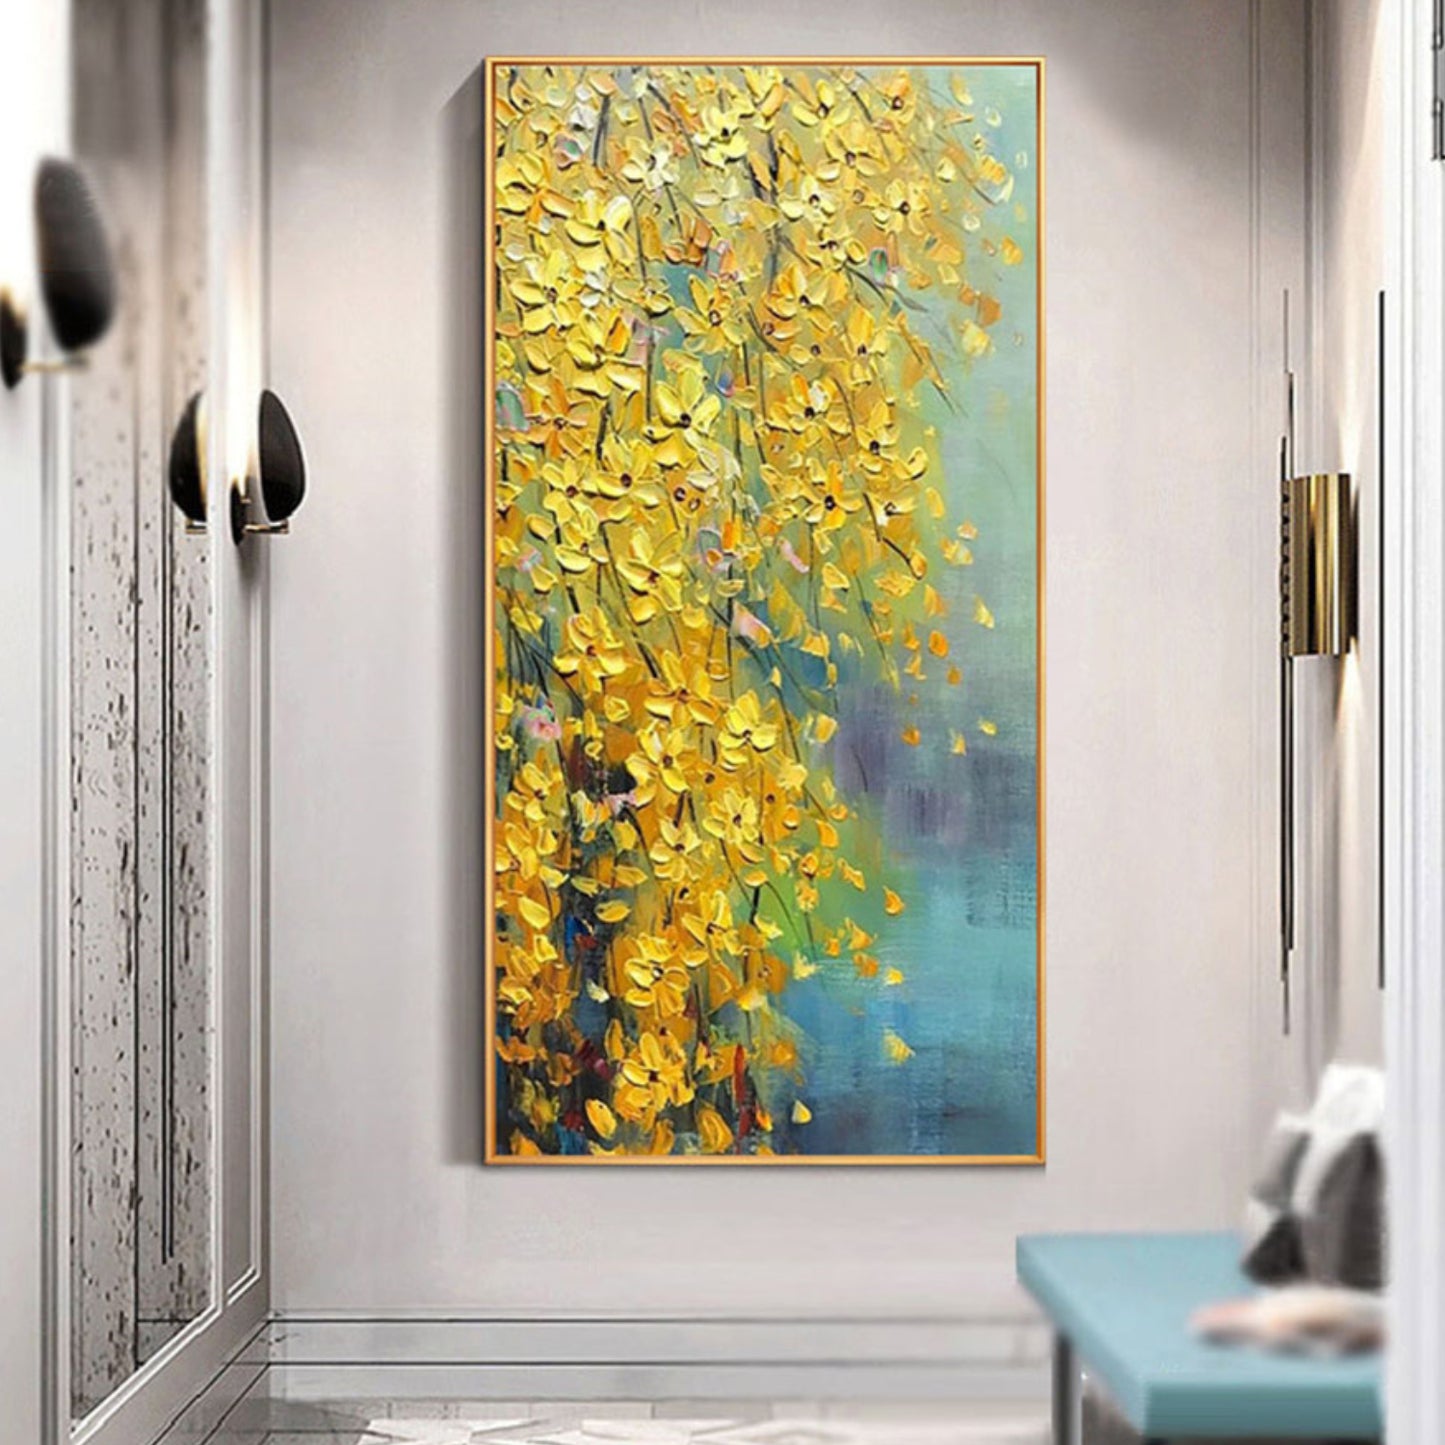 Haind Painted Stunning Floral Living Room Wall Art